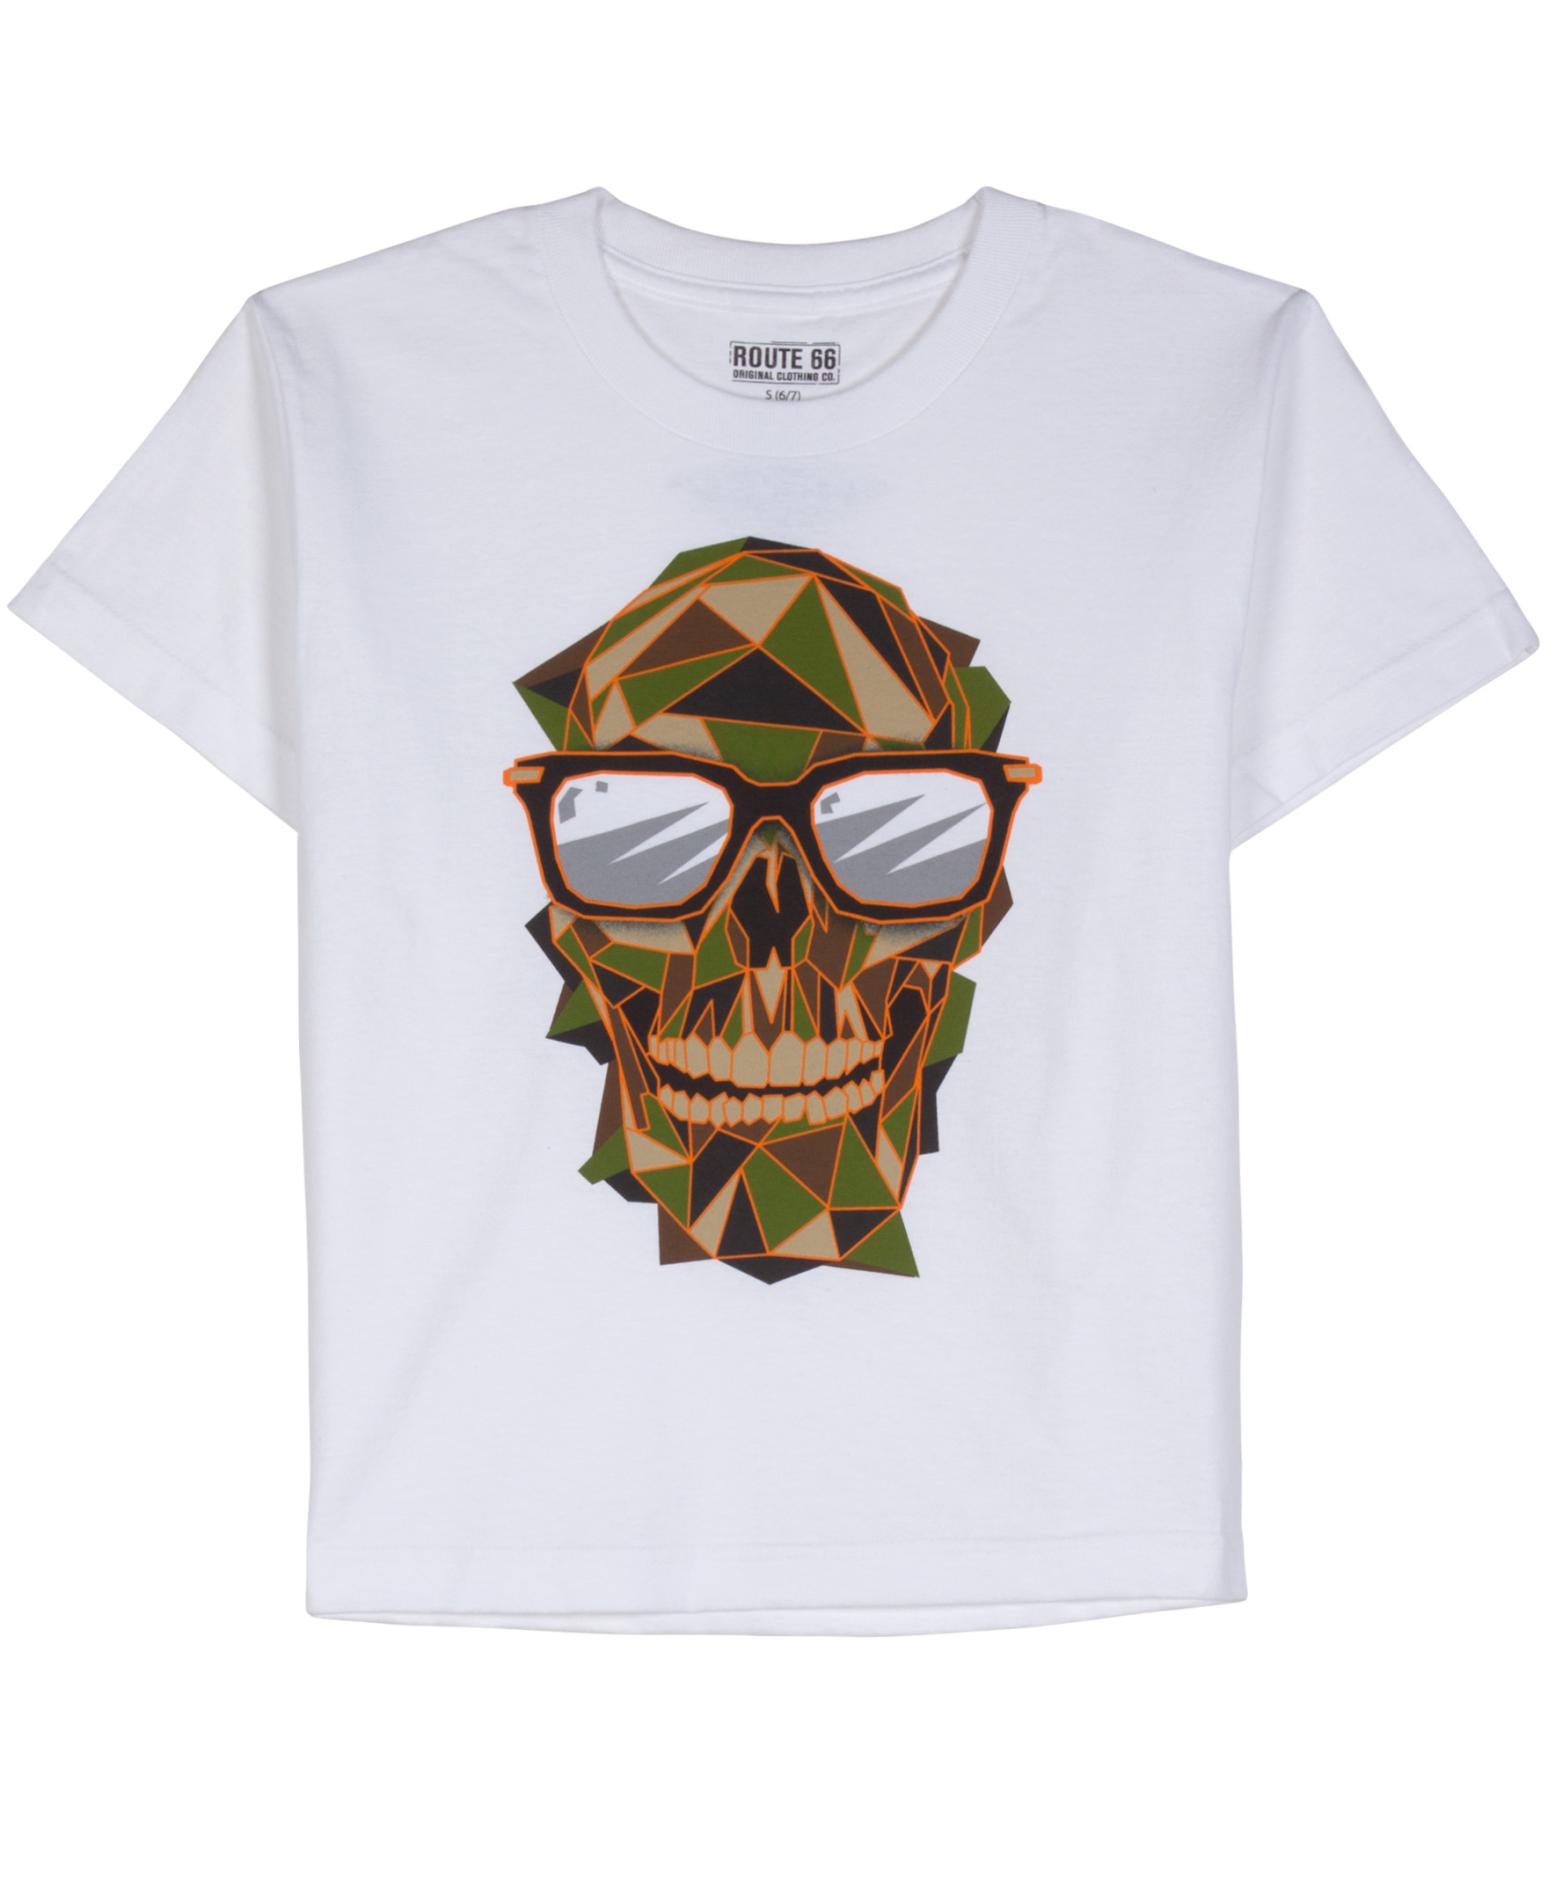 Route 66 Boy's Graphic T-Shirt - Skull